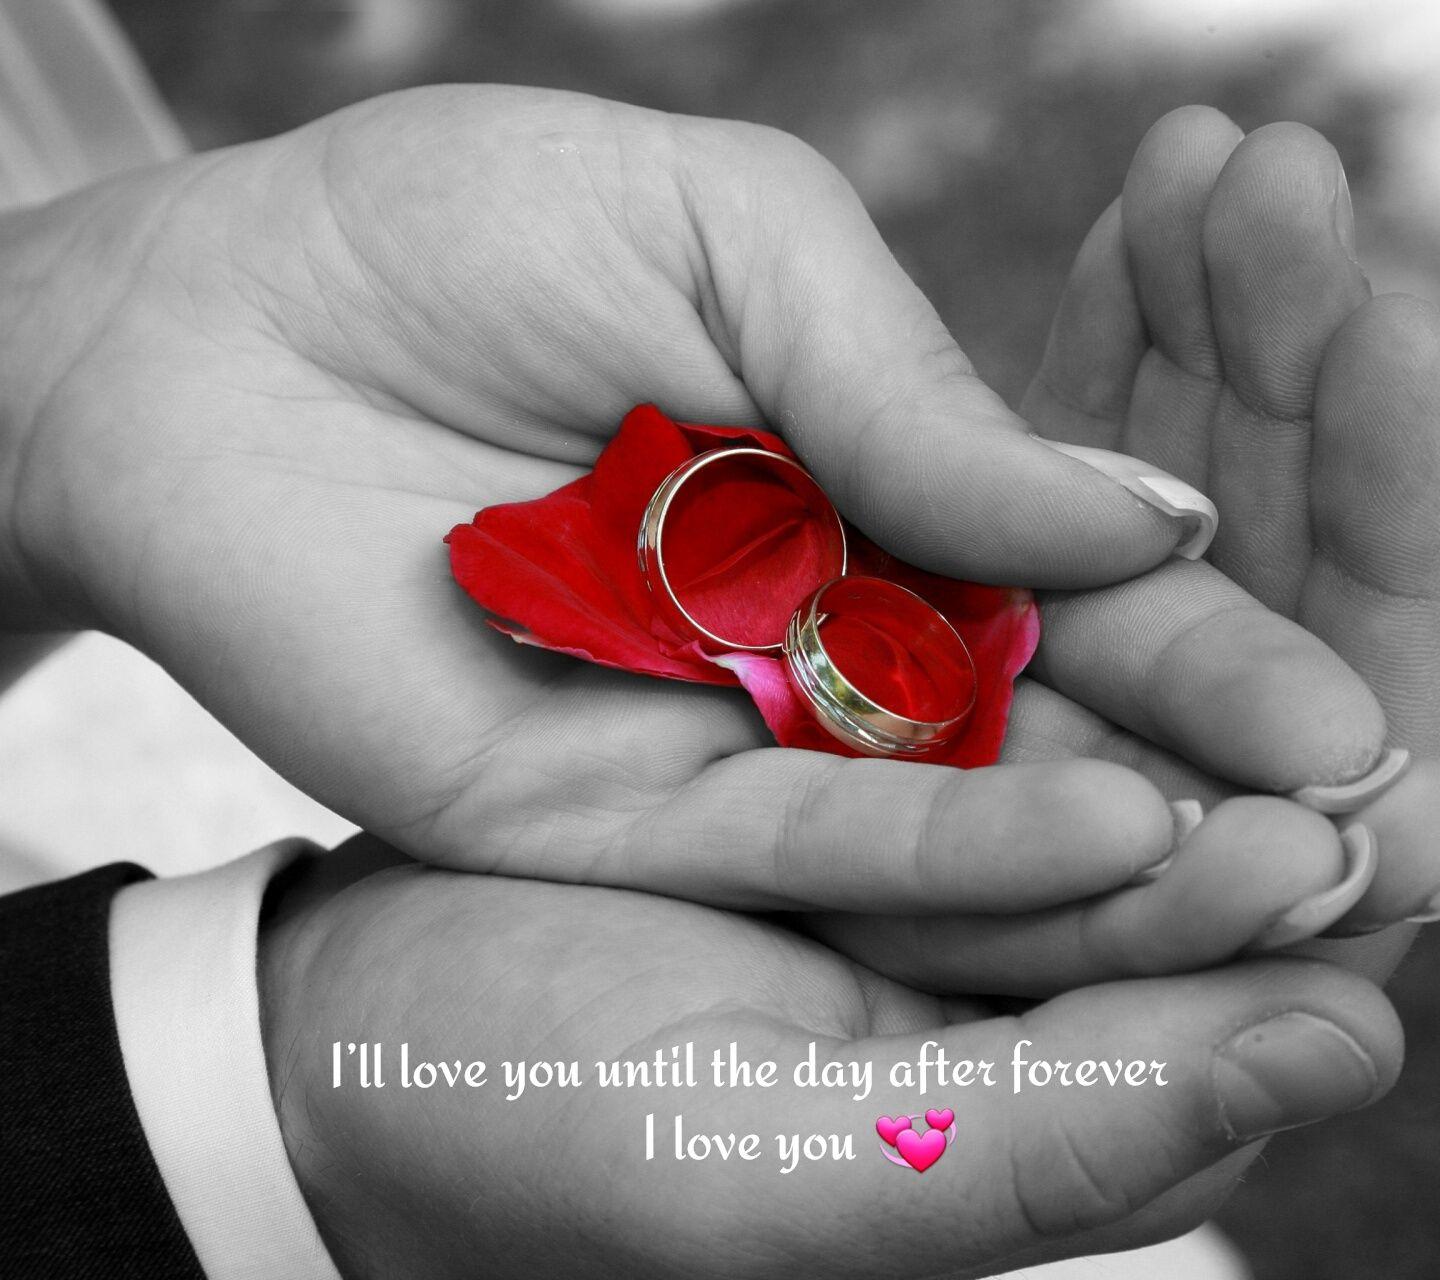 Download Untill the day love forever image laptop